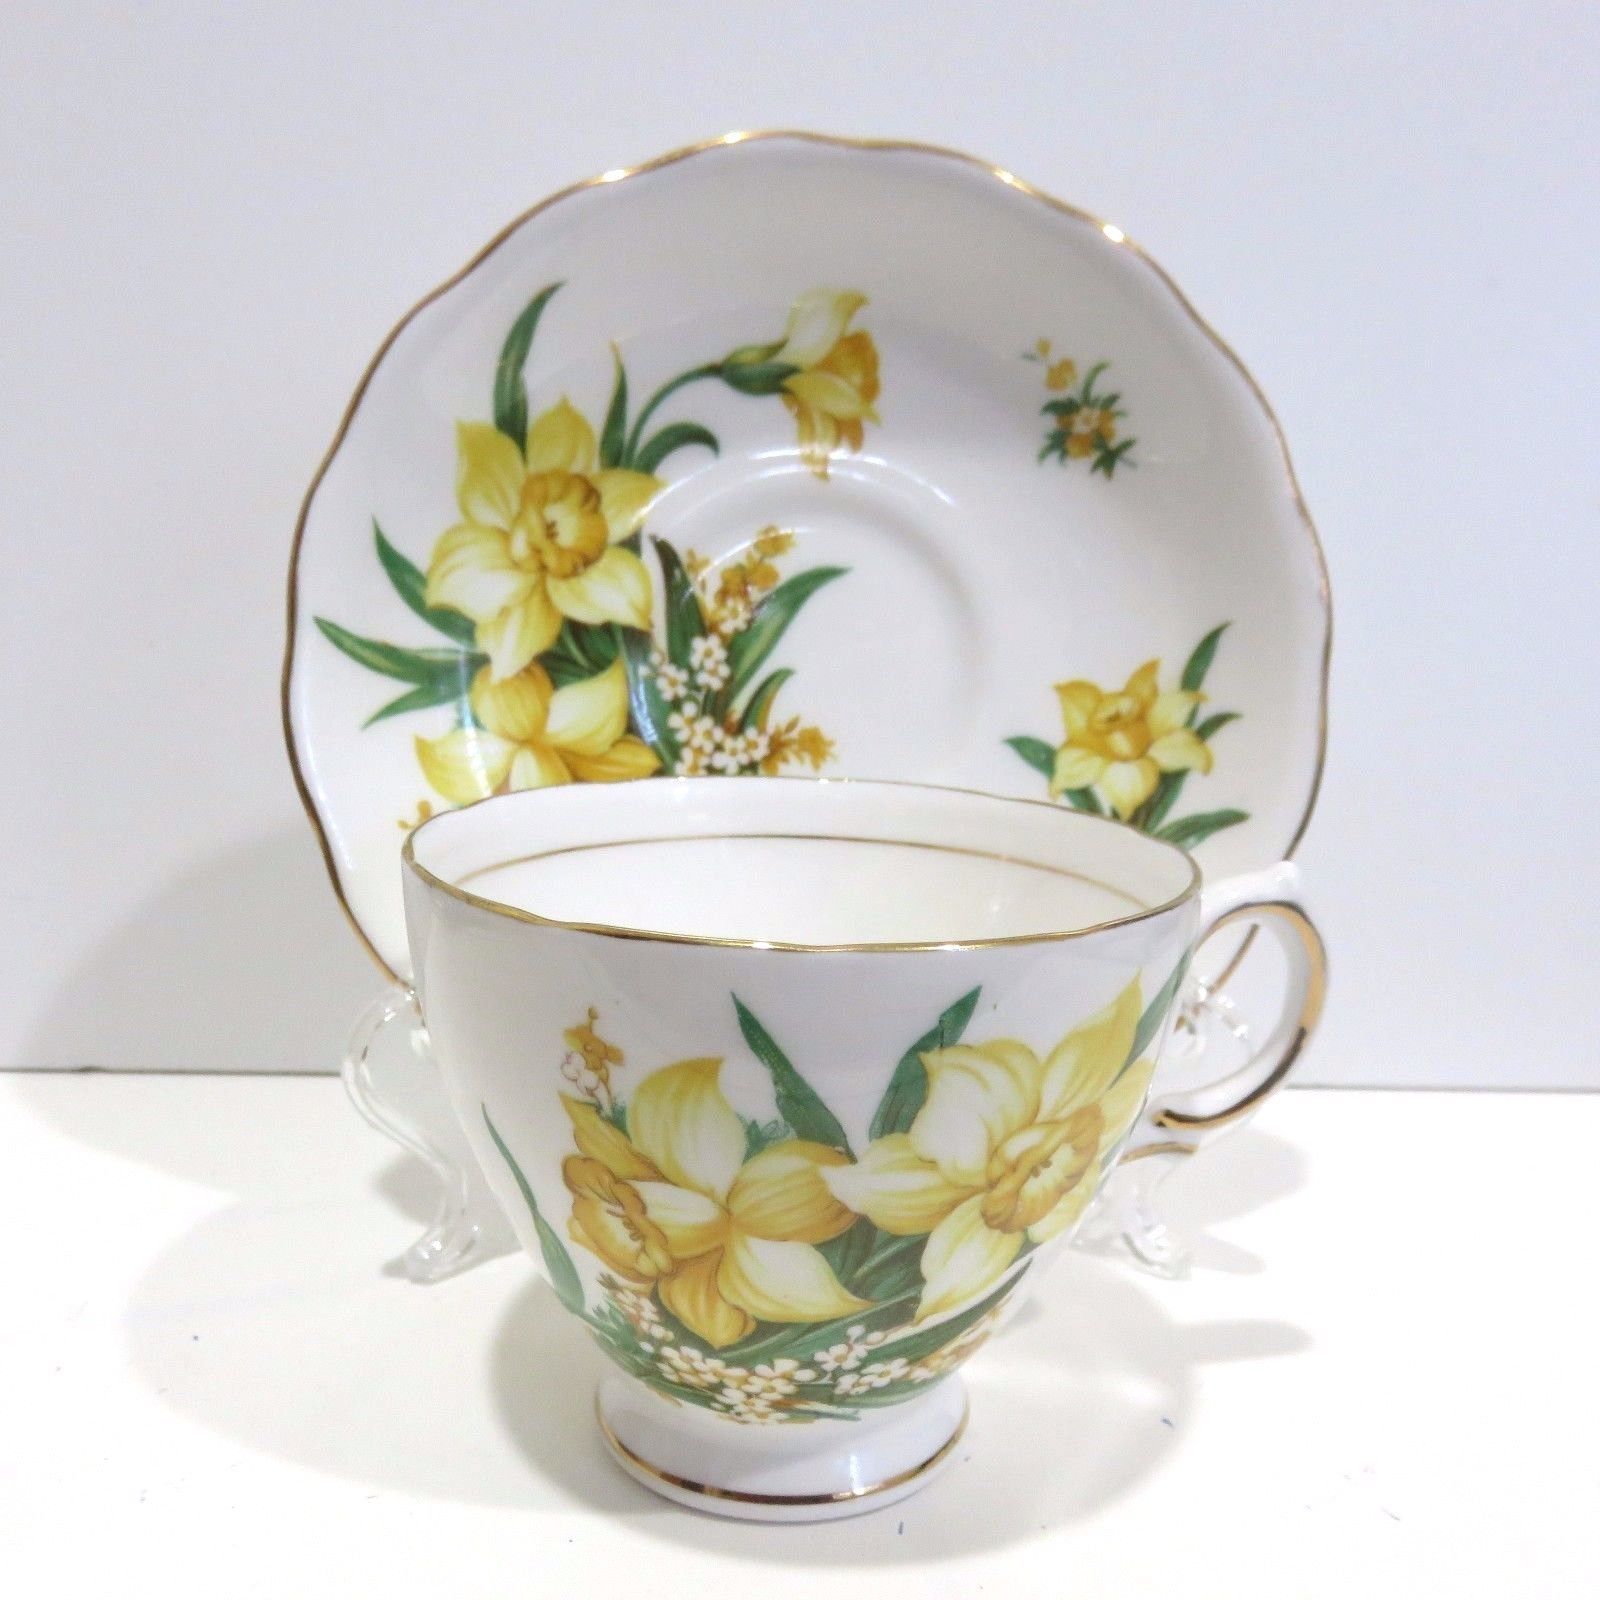 1950s Royal Vale Bone China Teacup Saucer from England Daffodils ...